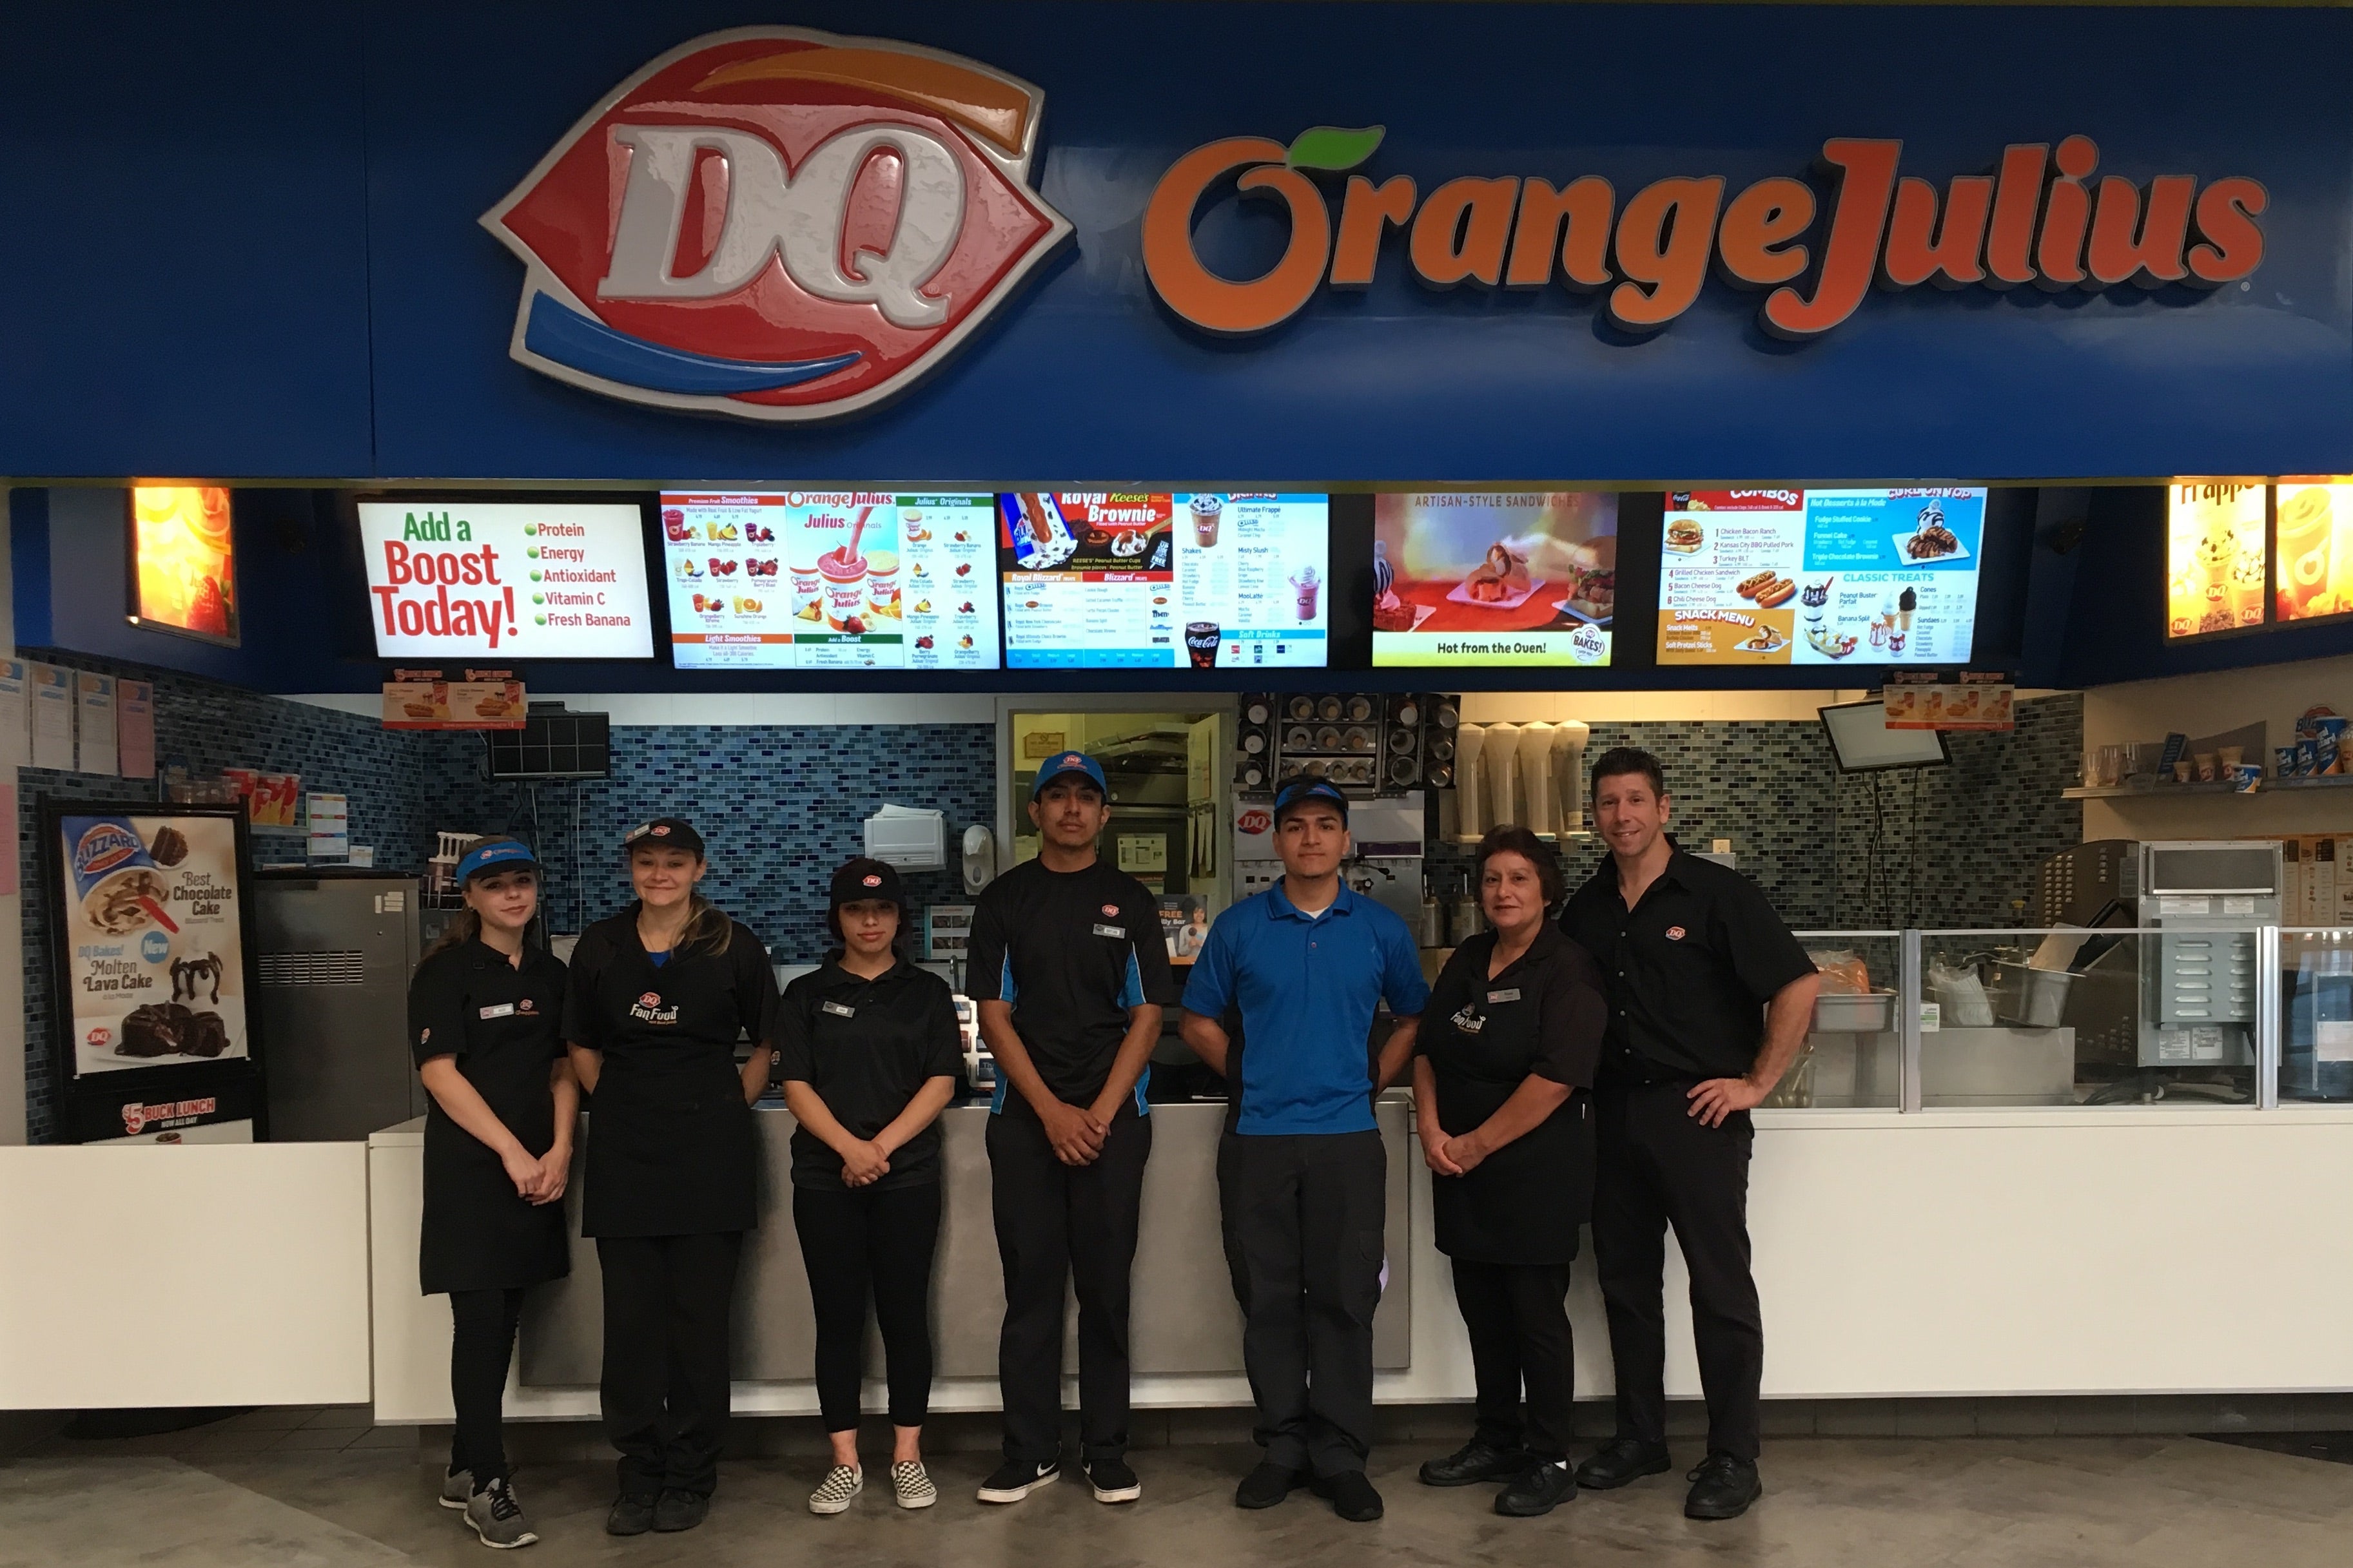 The staff of the Northridge Mall Dairy Queen, including franchise owner Rocco Frattaroli. They are posing in front of the location and the sign, as well as an Orange Julius sign.